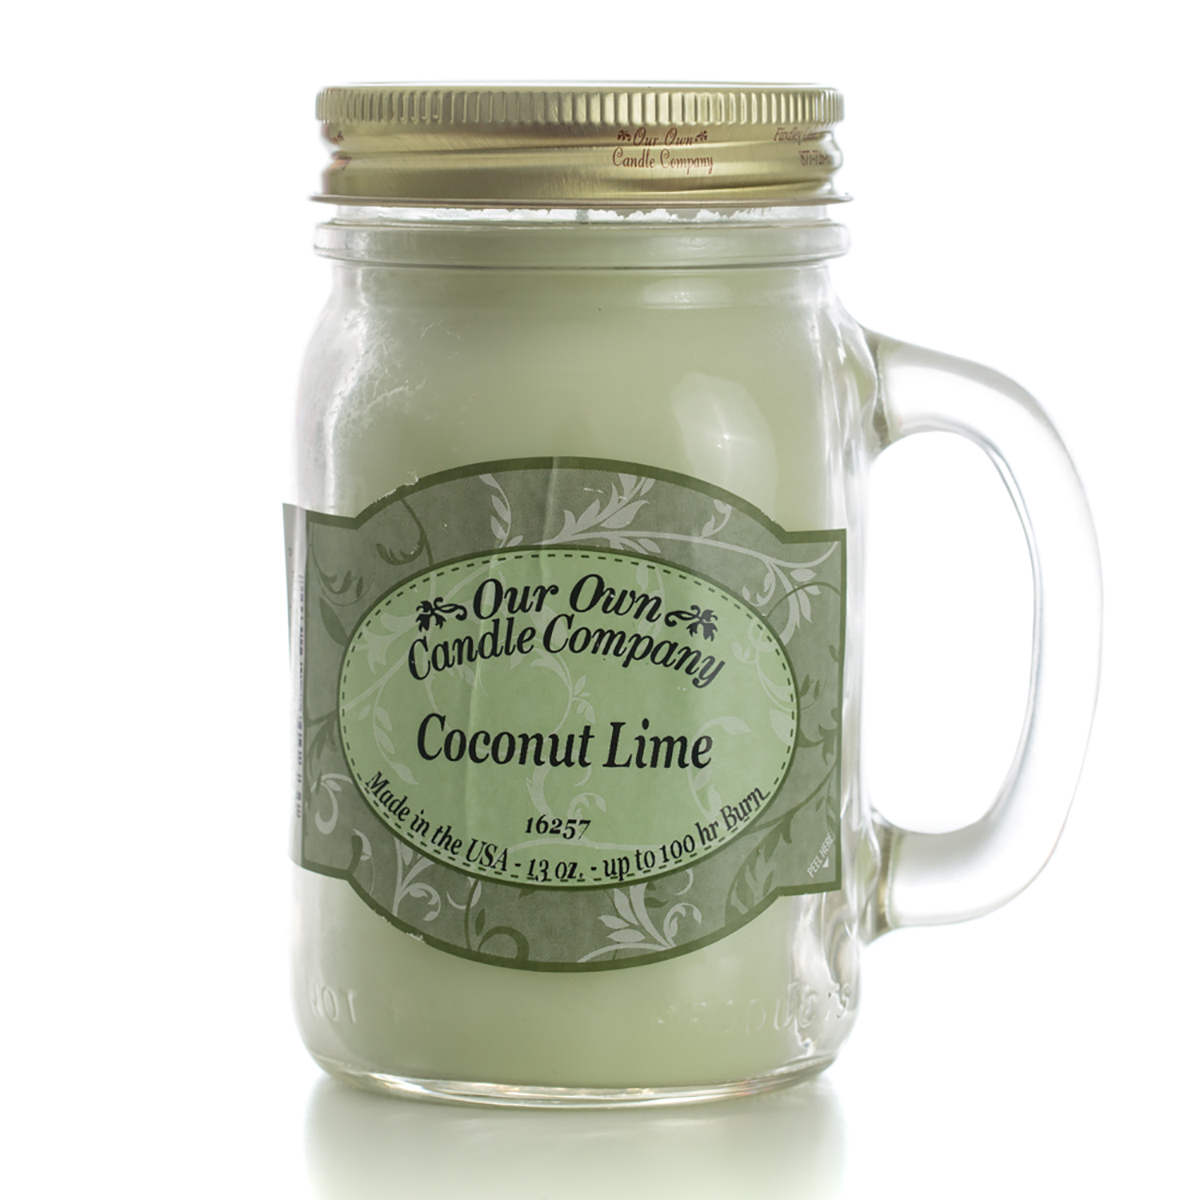 Our Own Candle Company Coconut Lime 13oz. Mason Jar Candle